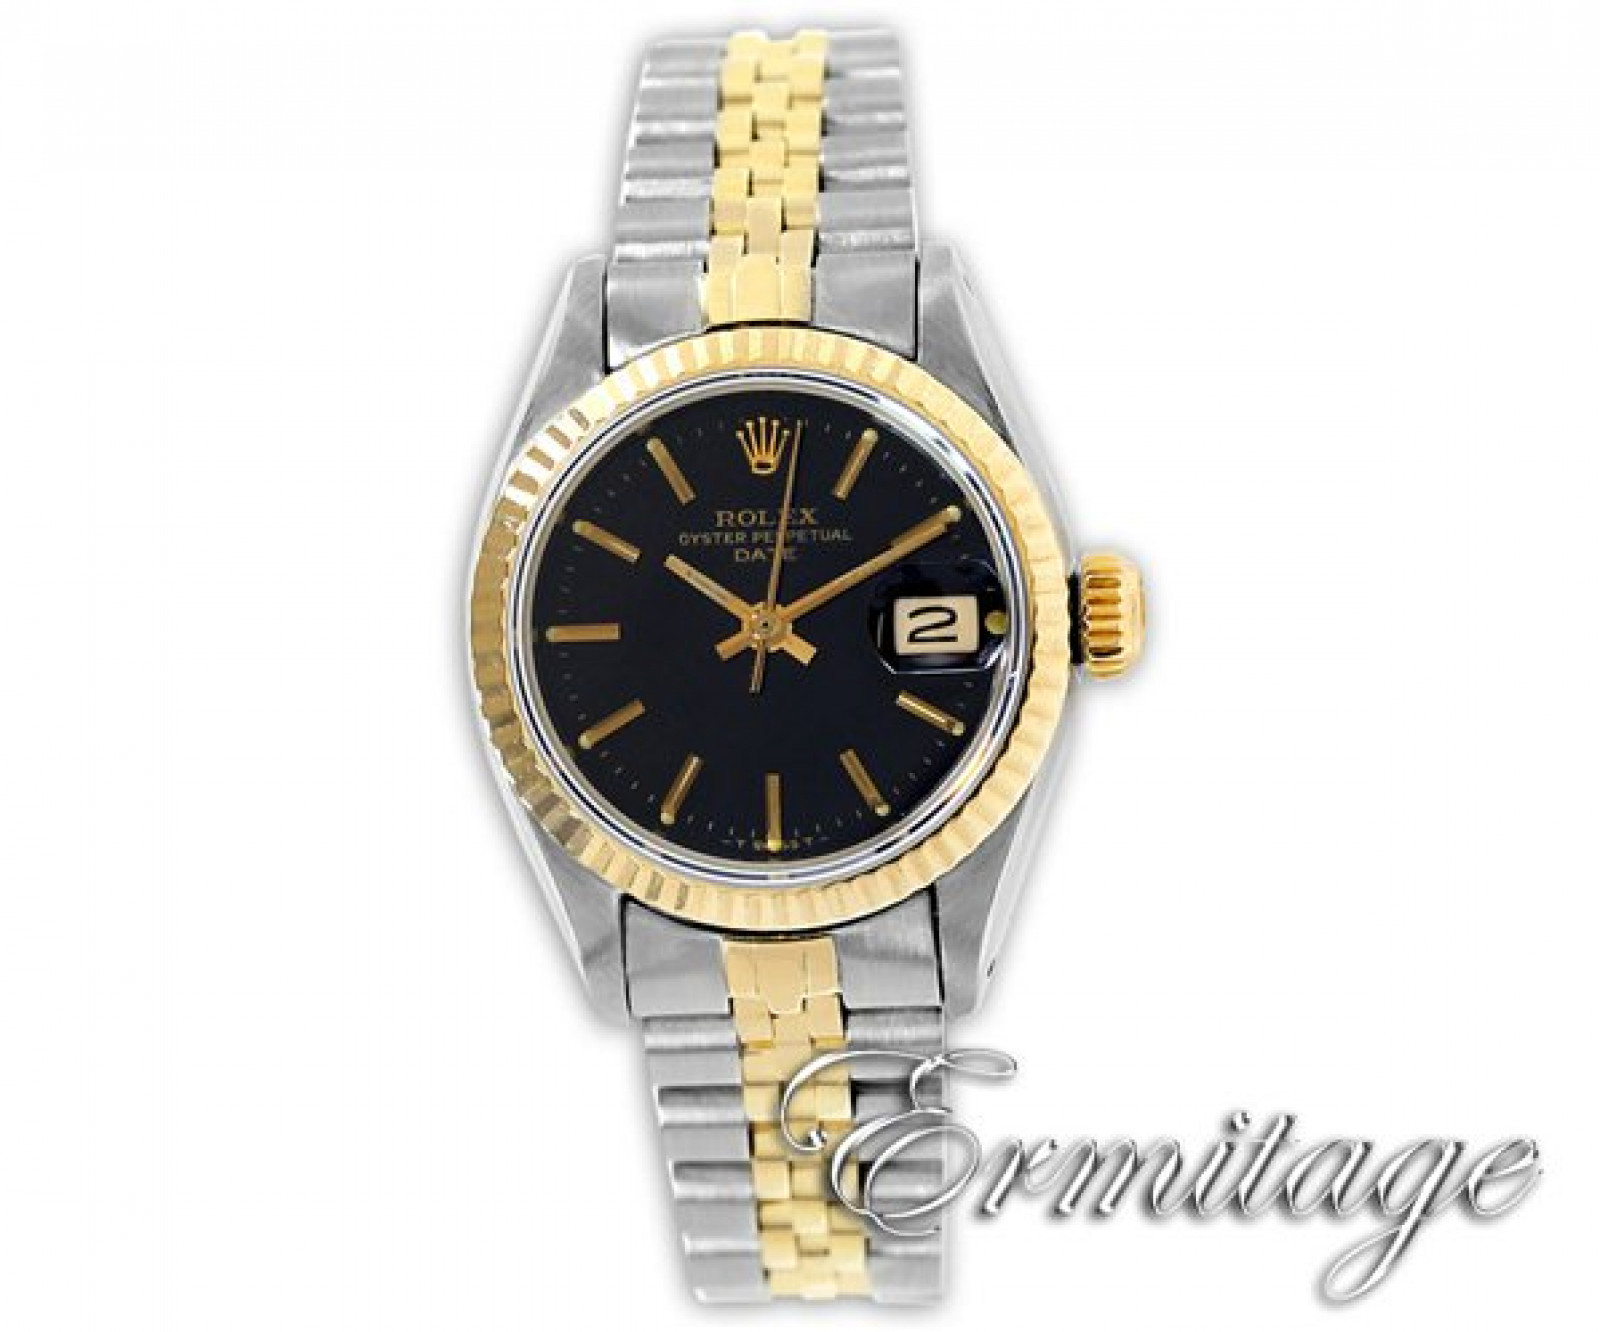 Vintage Rolex Date 6917 Gold & Steel with Black Dial